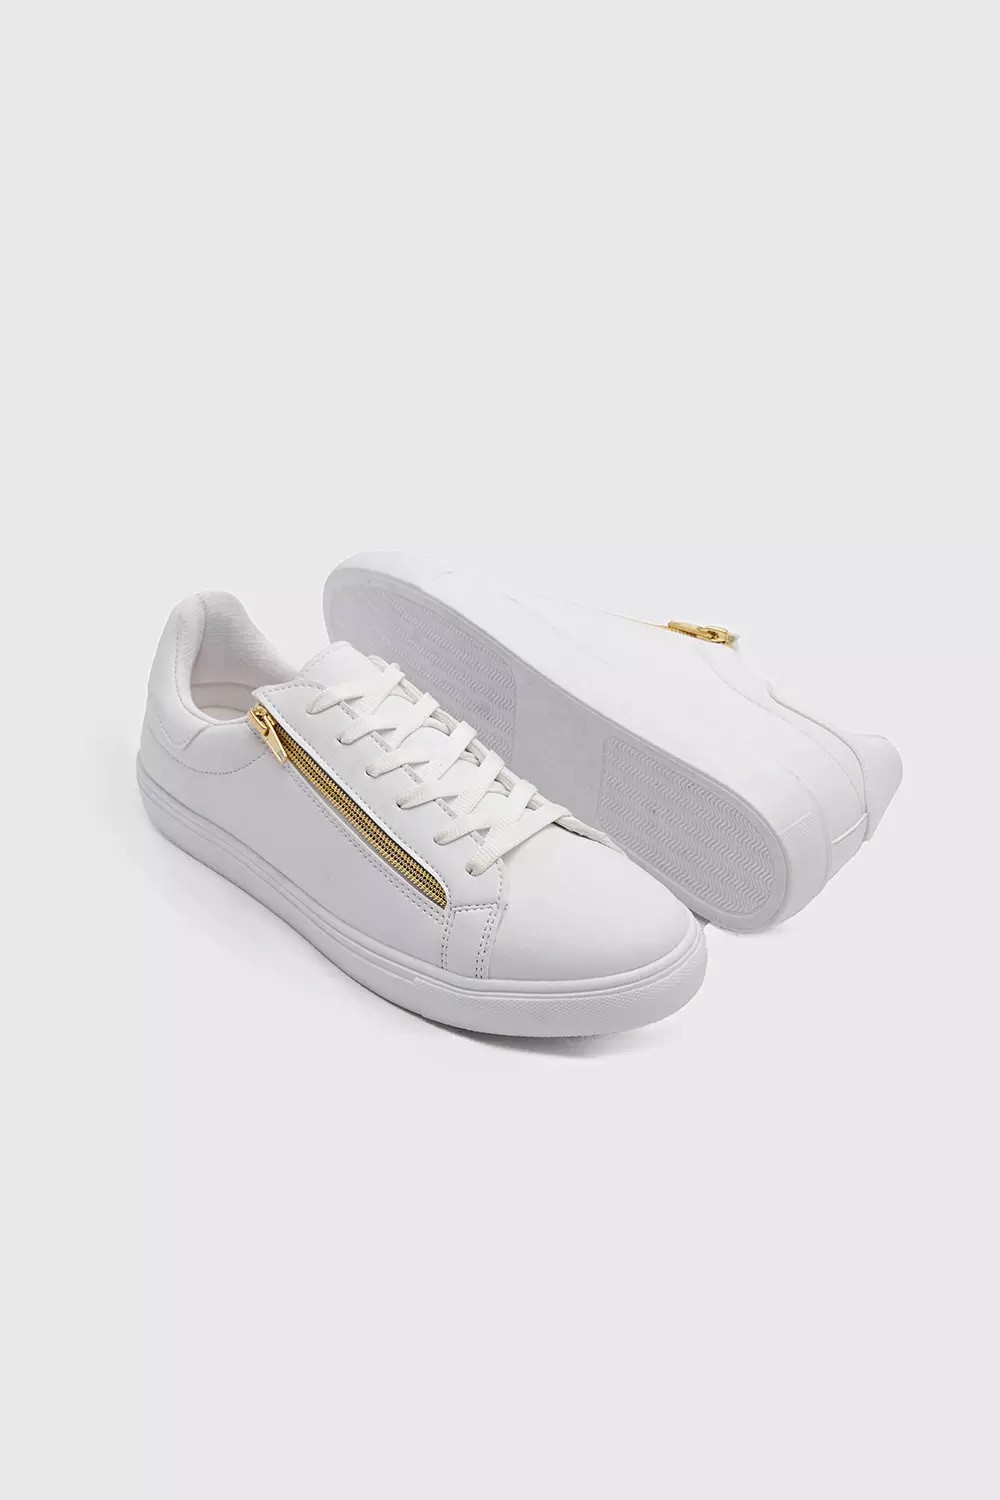 storm Gøre mit bedste Creed Faux Leather Side Zip Sneakers | boohooMAN USA